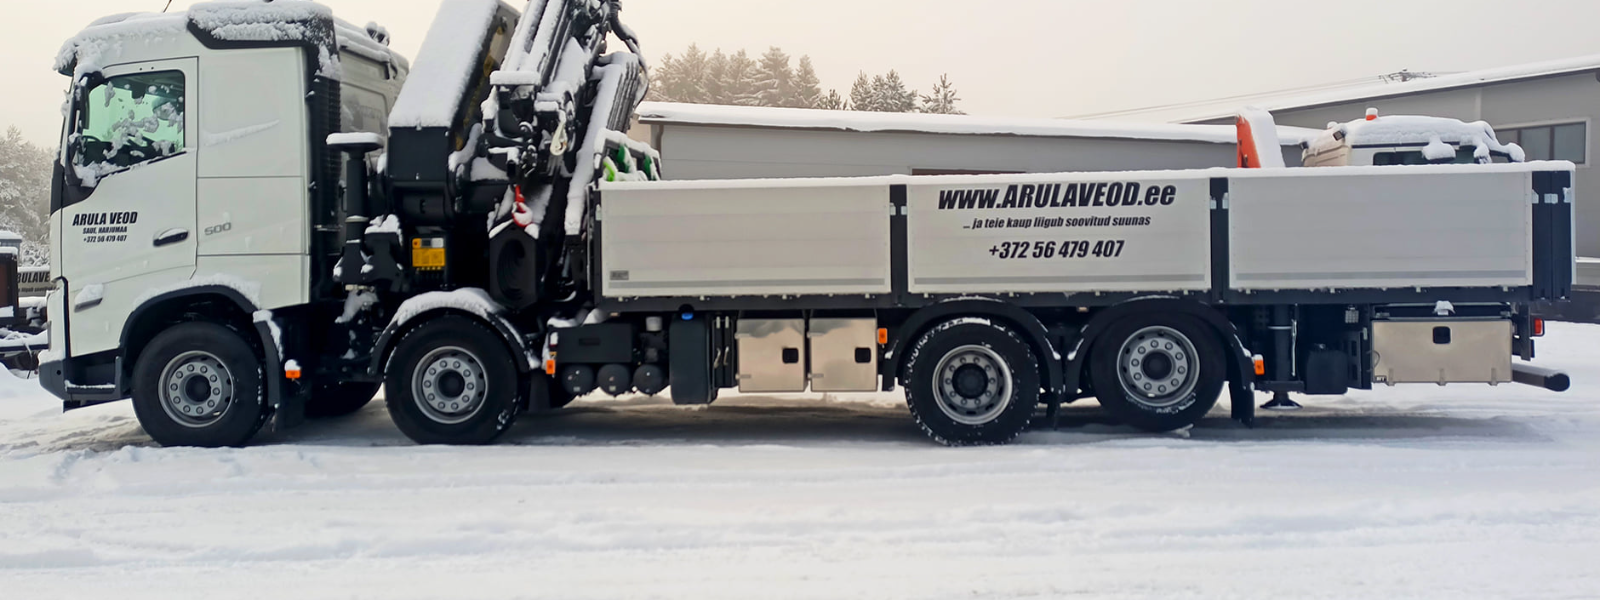 ARULA VEOD OÜ - Rental of containers, excavators, Loaders, Thighlifts, trailers and commercial trailers, transport servic...